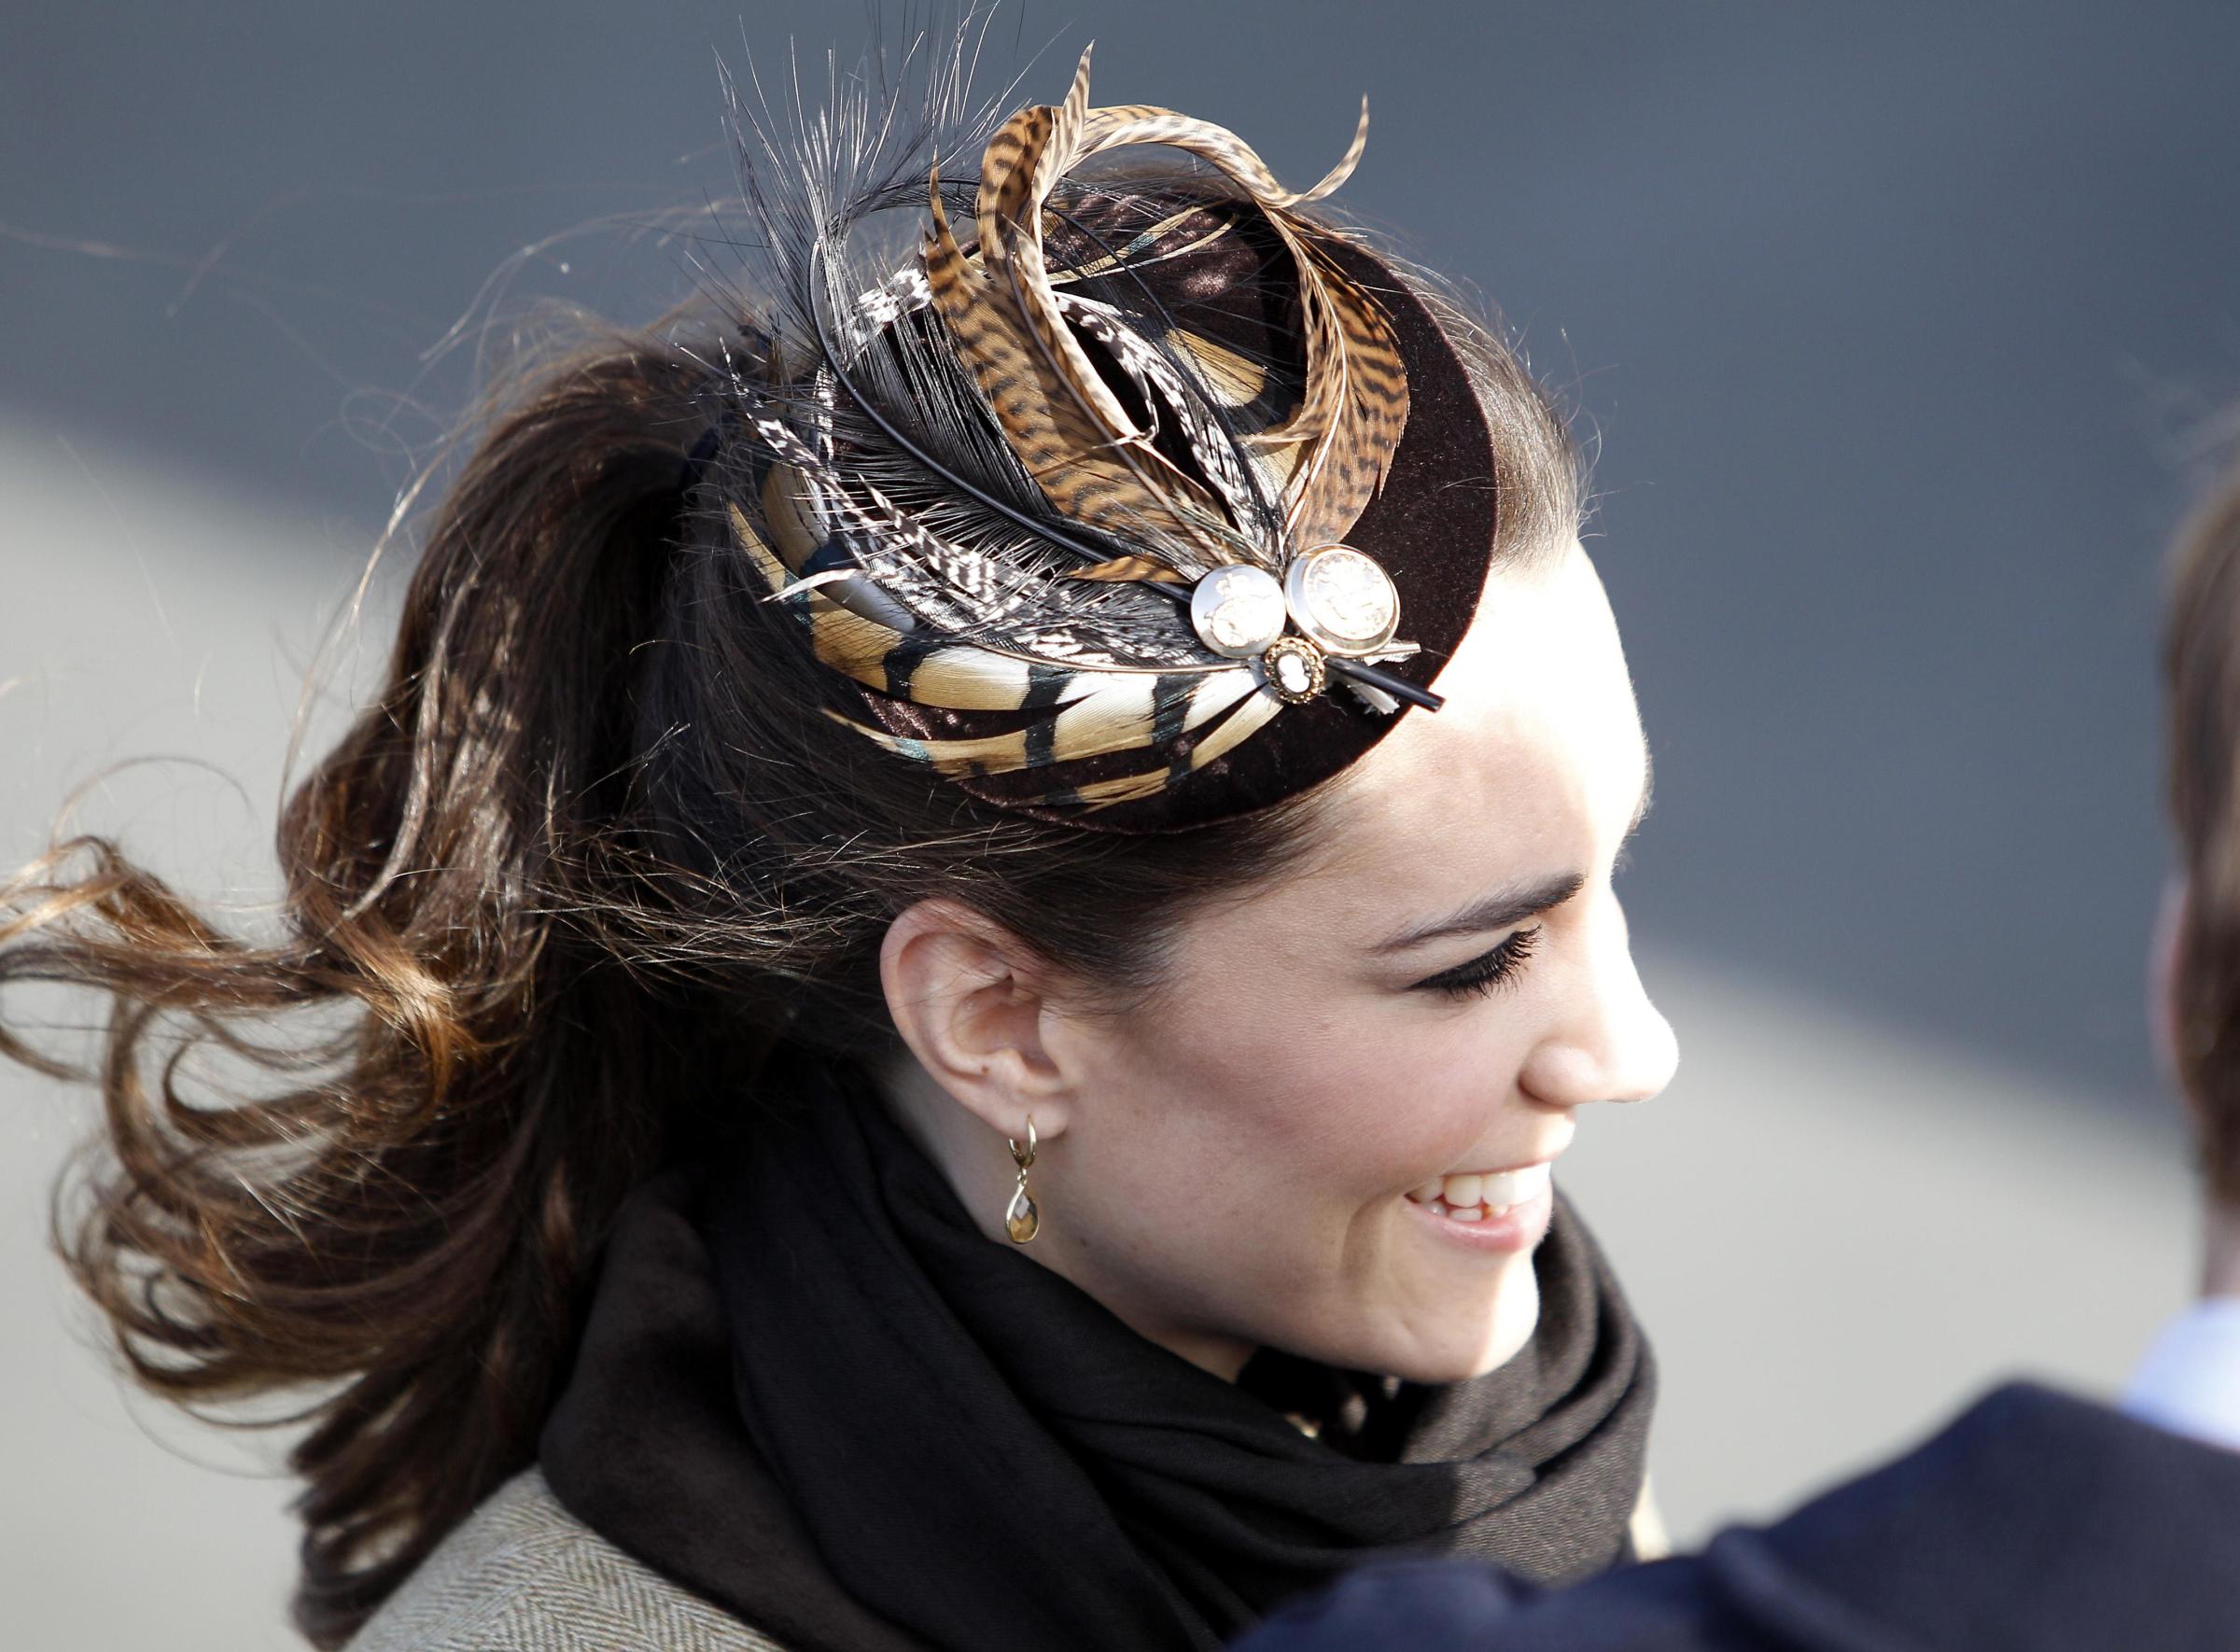 Prince William and Kate Middleton visit Anglesey